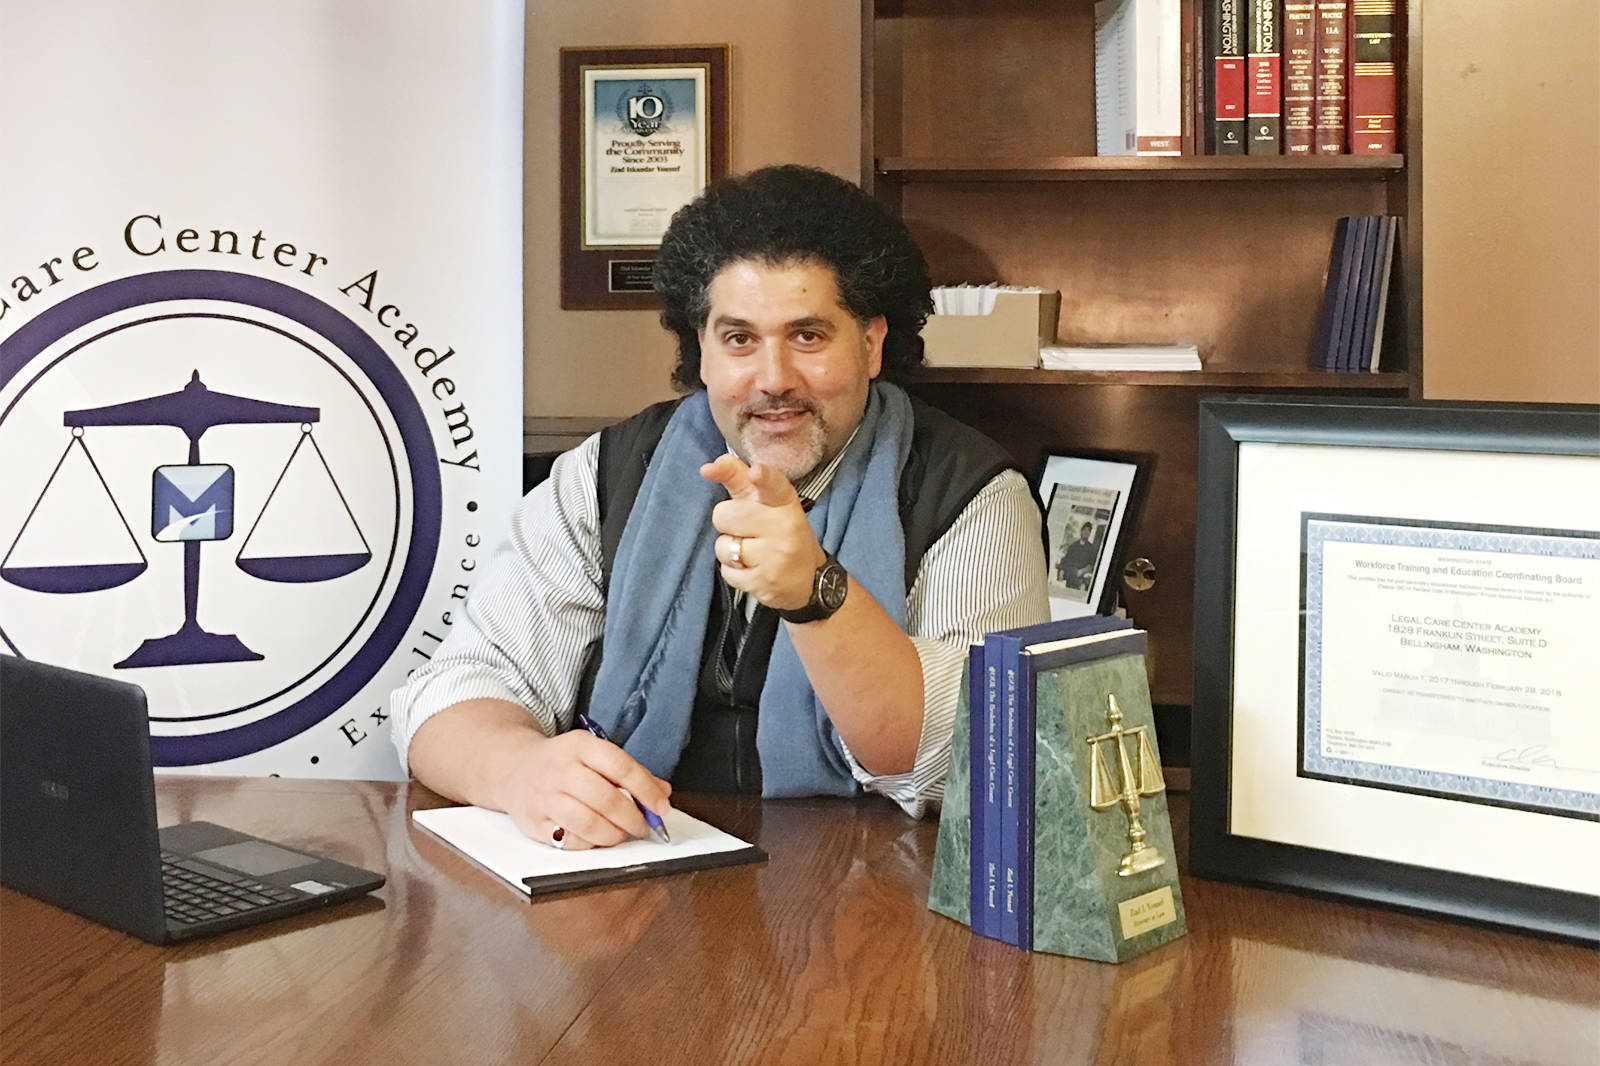 MyTrafficMan.net’s Ziad Youssef, founder of Whatcom County’s Legal Care Center Academy, is offering a scholarship opportunity for paralegal students.